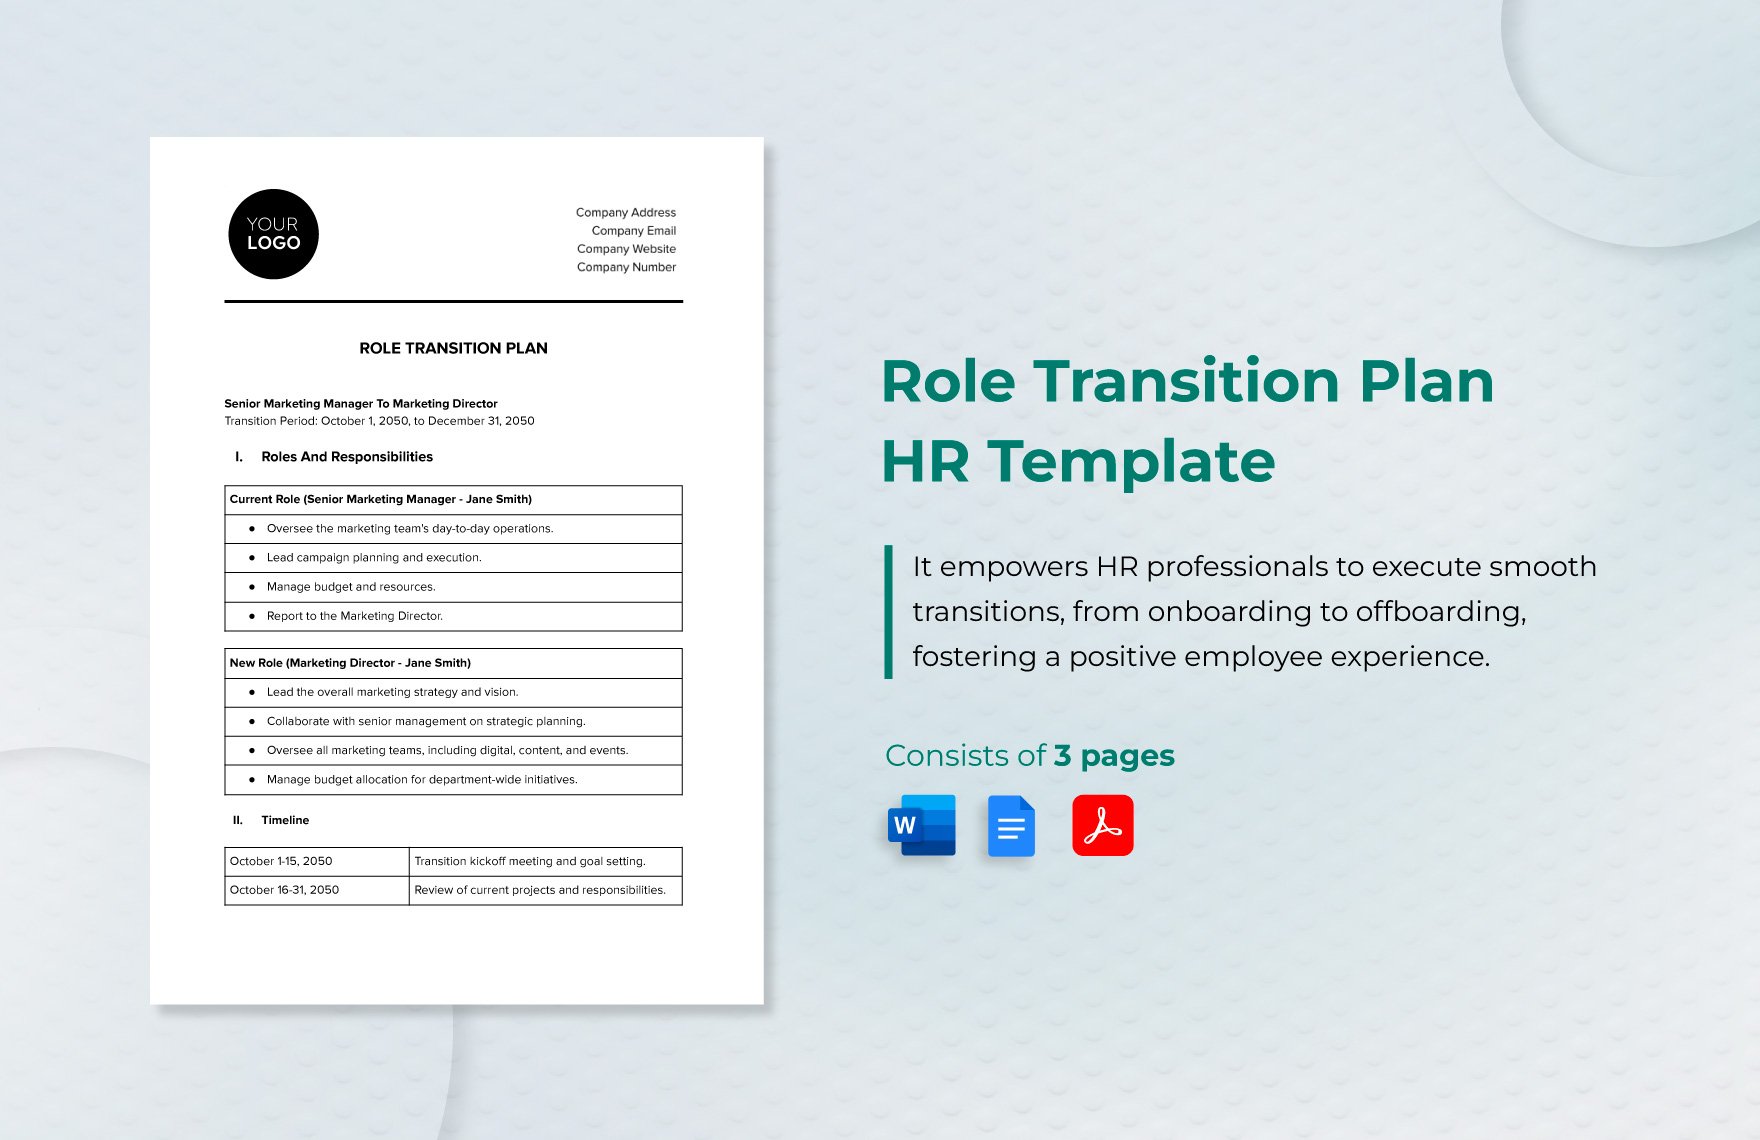 Role Transition Plan HR Template